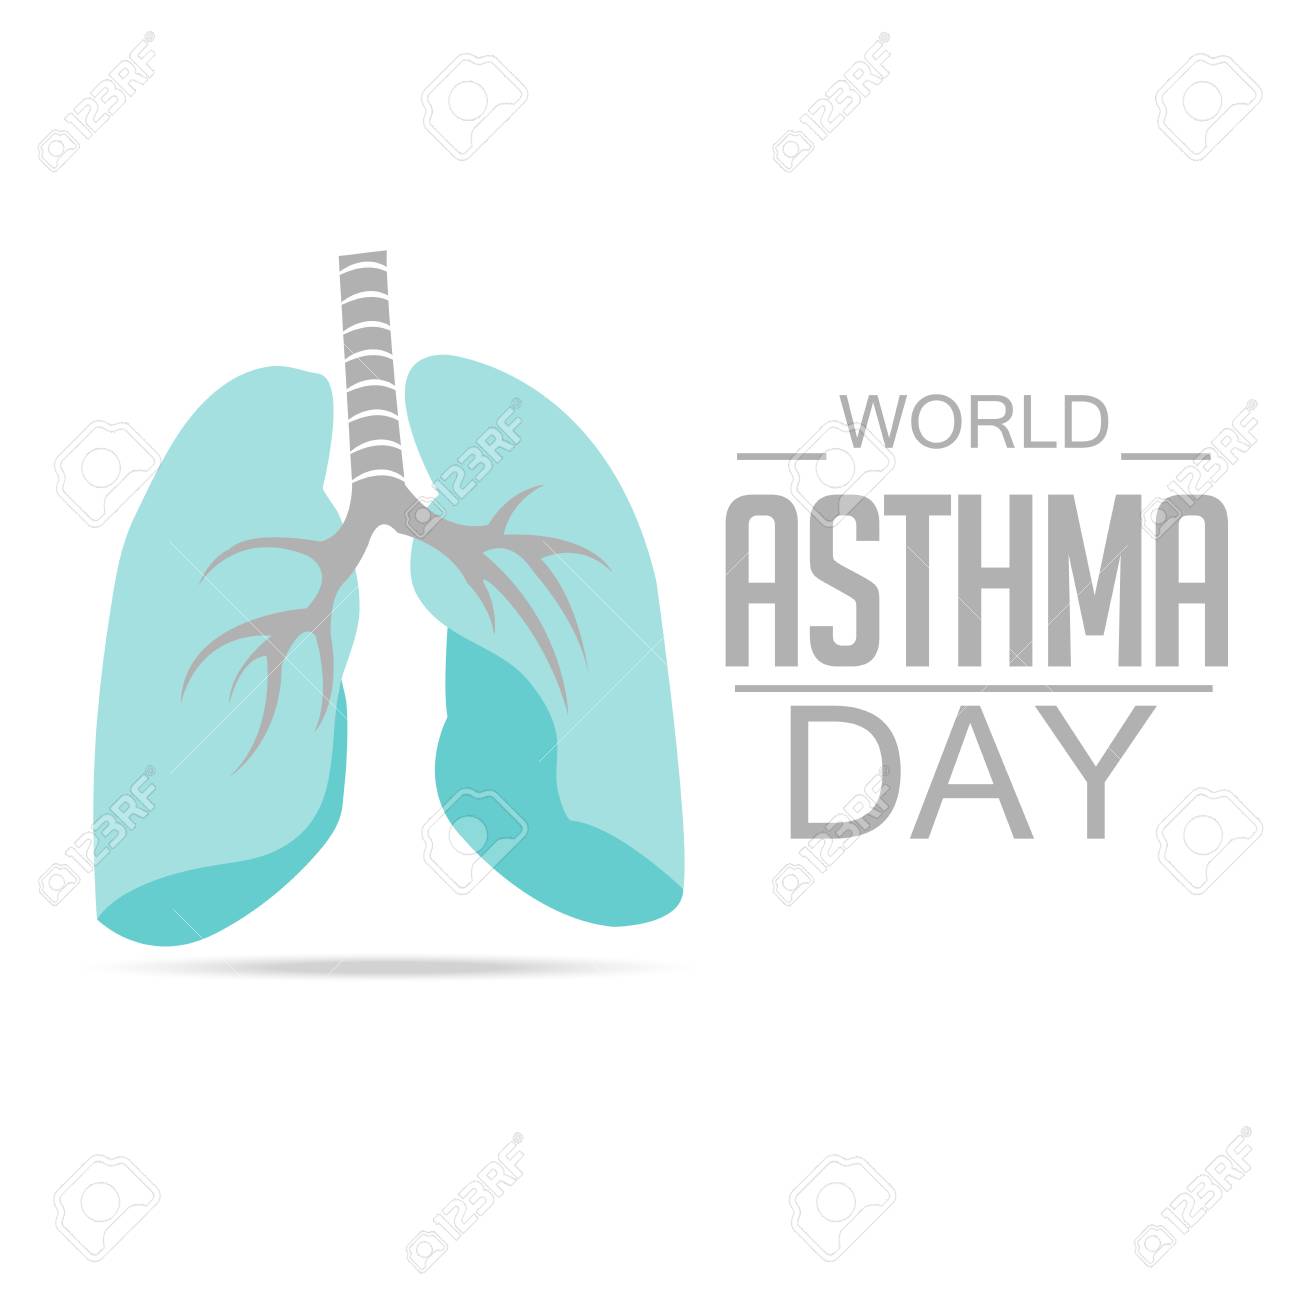 World Asthma Day Banner With Text And Lungs On White Background